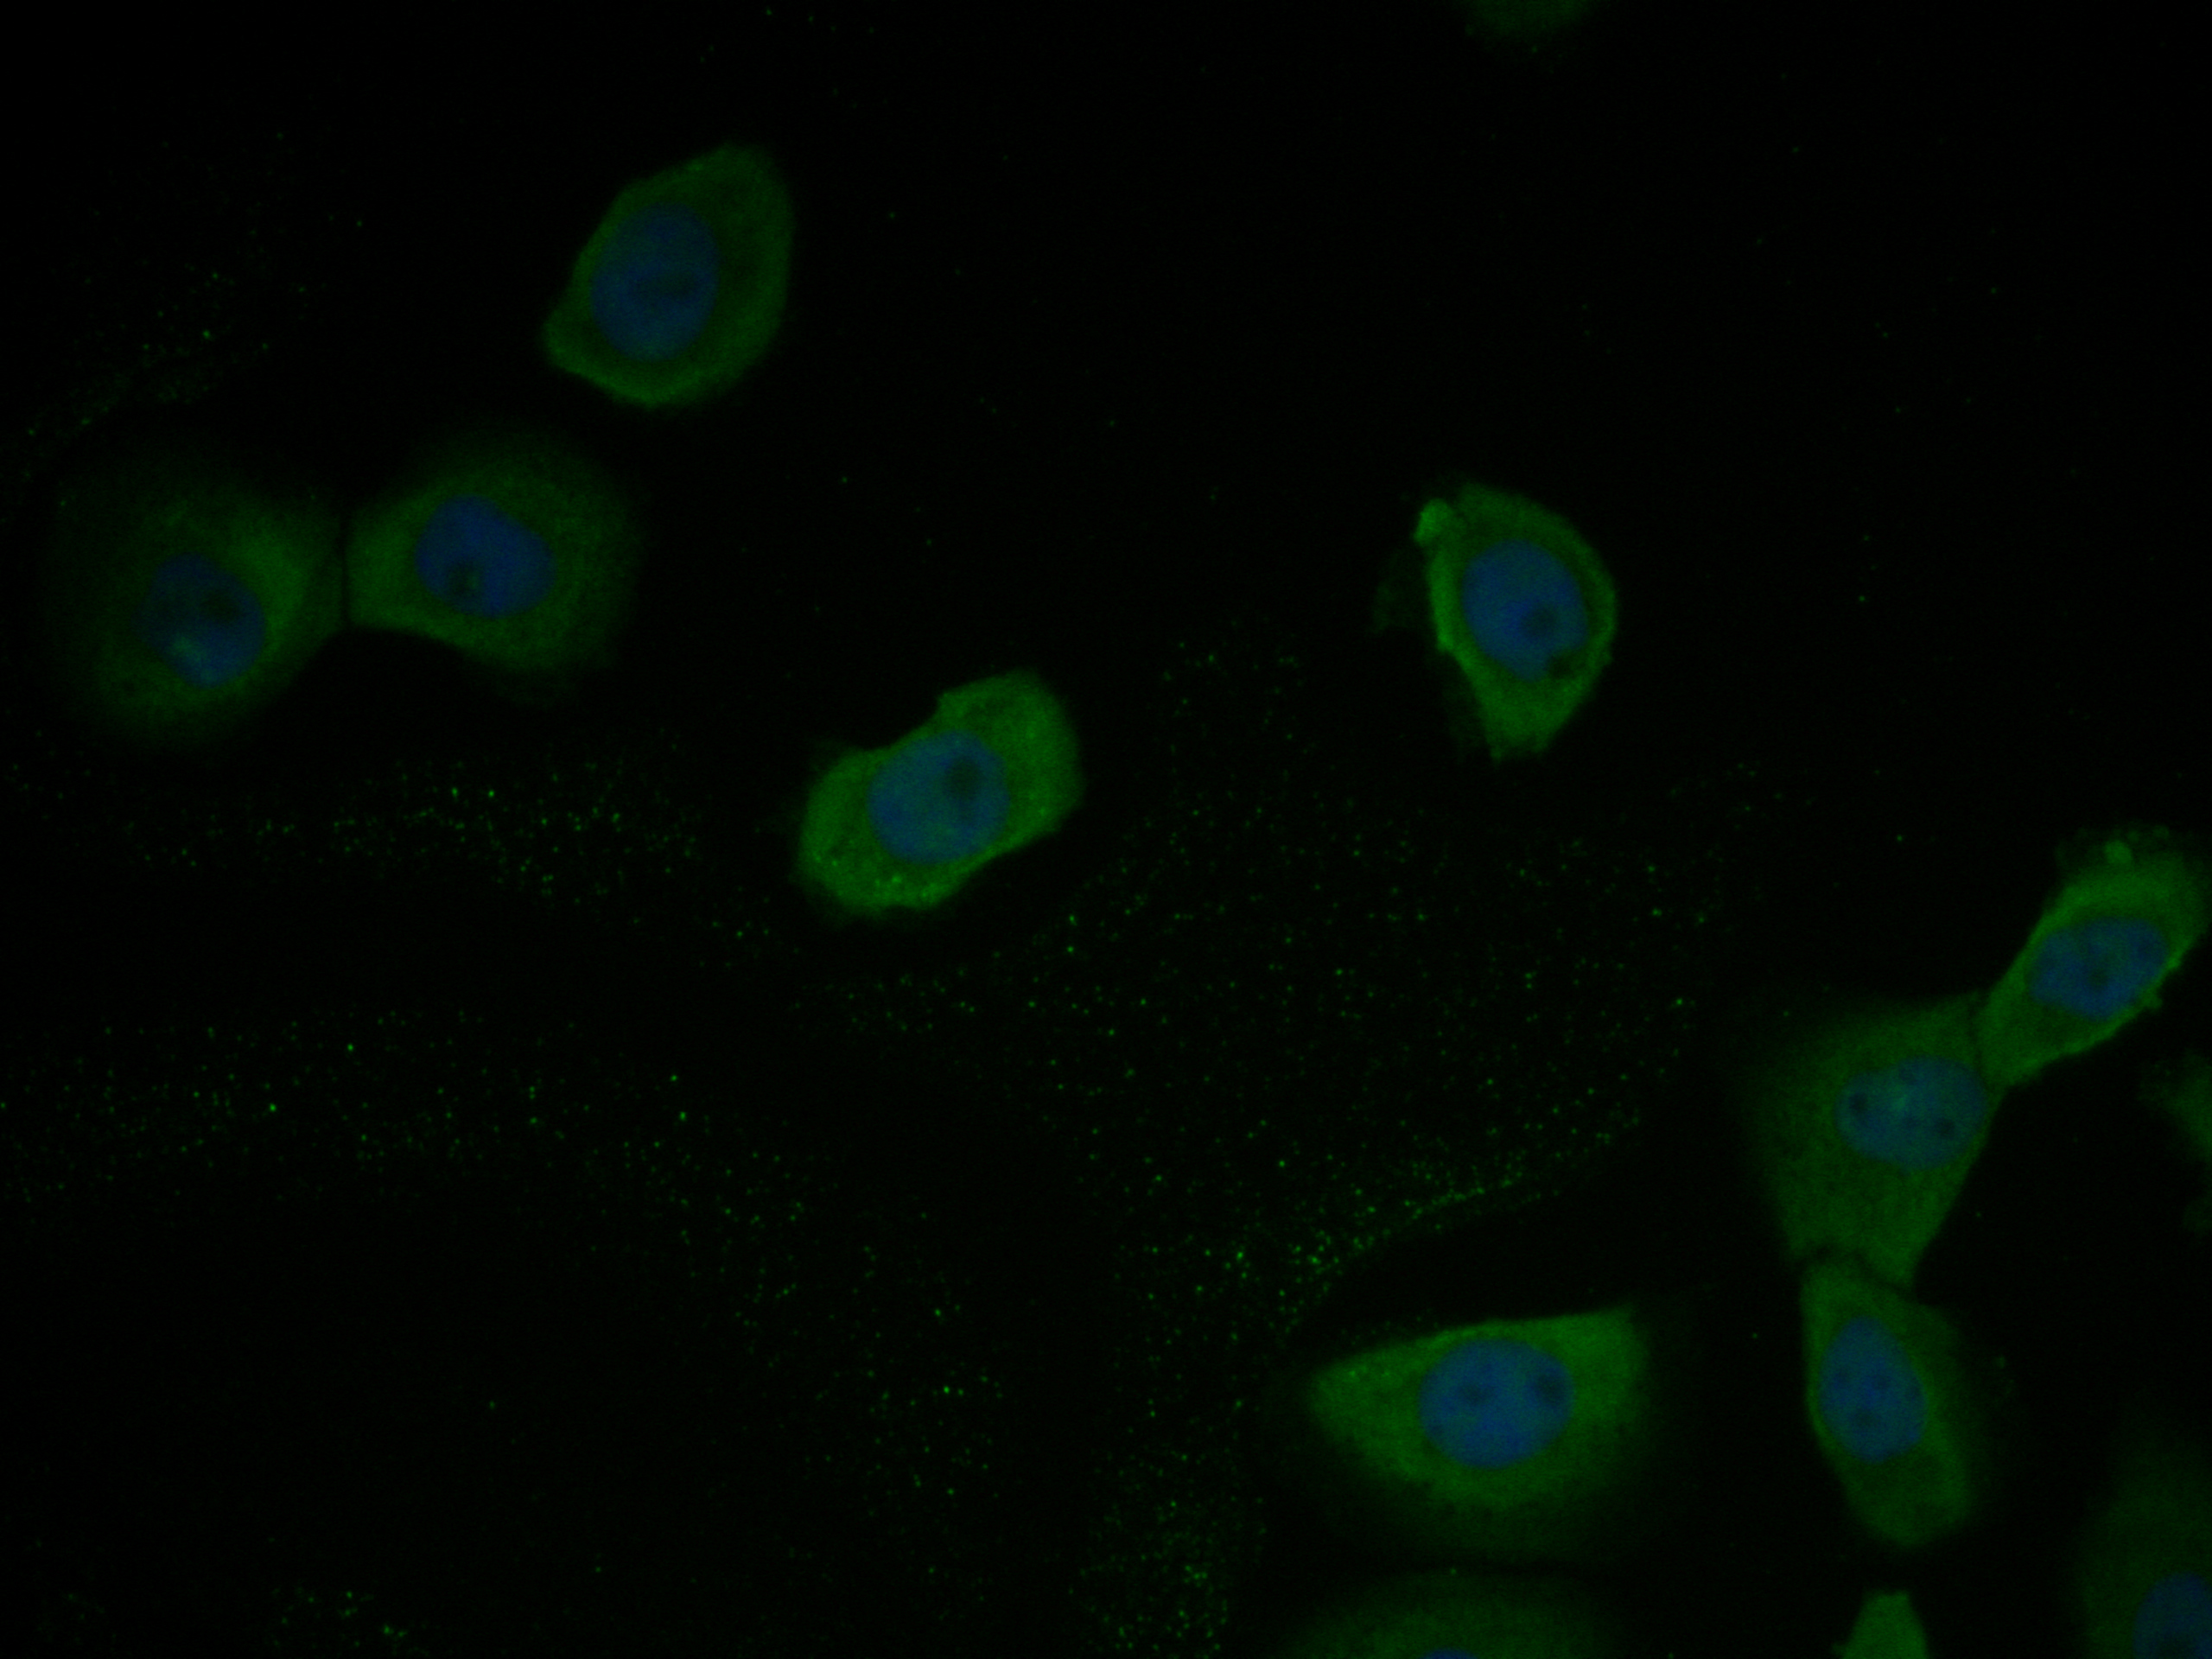 ICC staining of TMEM163 in A431 cells (green). Formalin fixed cells were permeabilized with 0.1% Triton X-100 in TBS for 10 minutes at room temperature and blocked with 1% Blocker BSA for 15 minutes at room temperature. Cells were probed with the primary antibody (ER1901-87, 1/200) for 1 hour at room temperature, washed with PBS. Alexa Fluor®488 Goat anti-Rabbit IgG was used as the secondary antibody at 1/1,000 dilution. The nuclear counter stain is DAPI (blue).